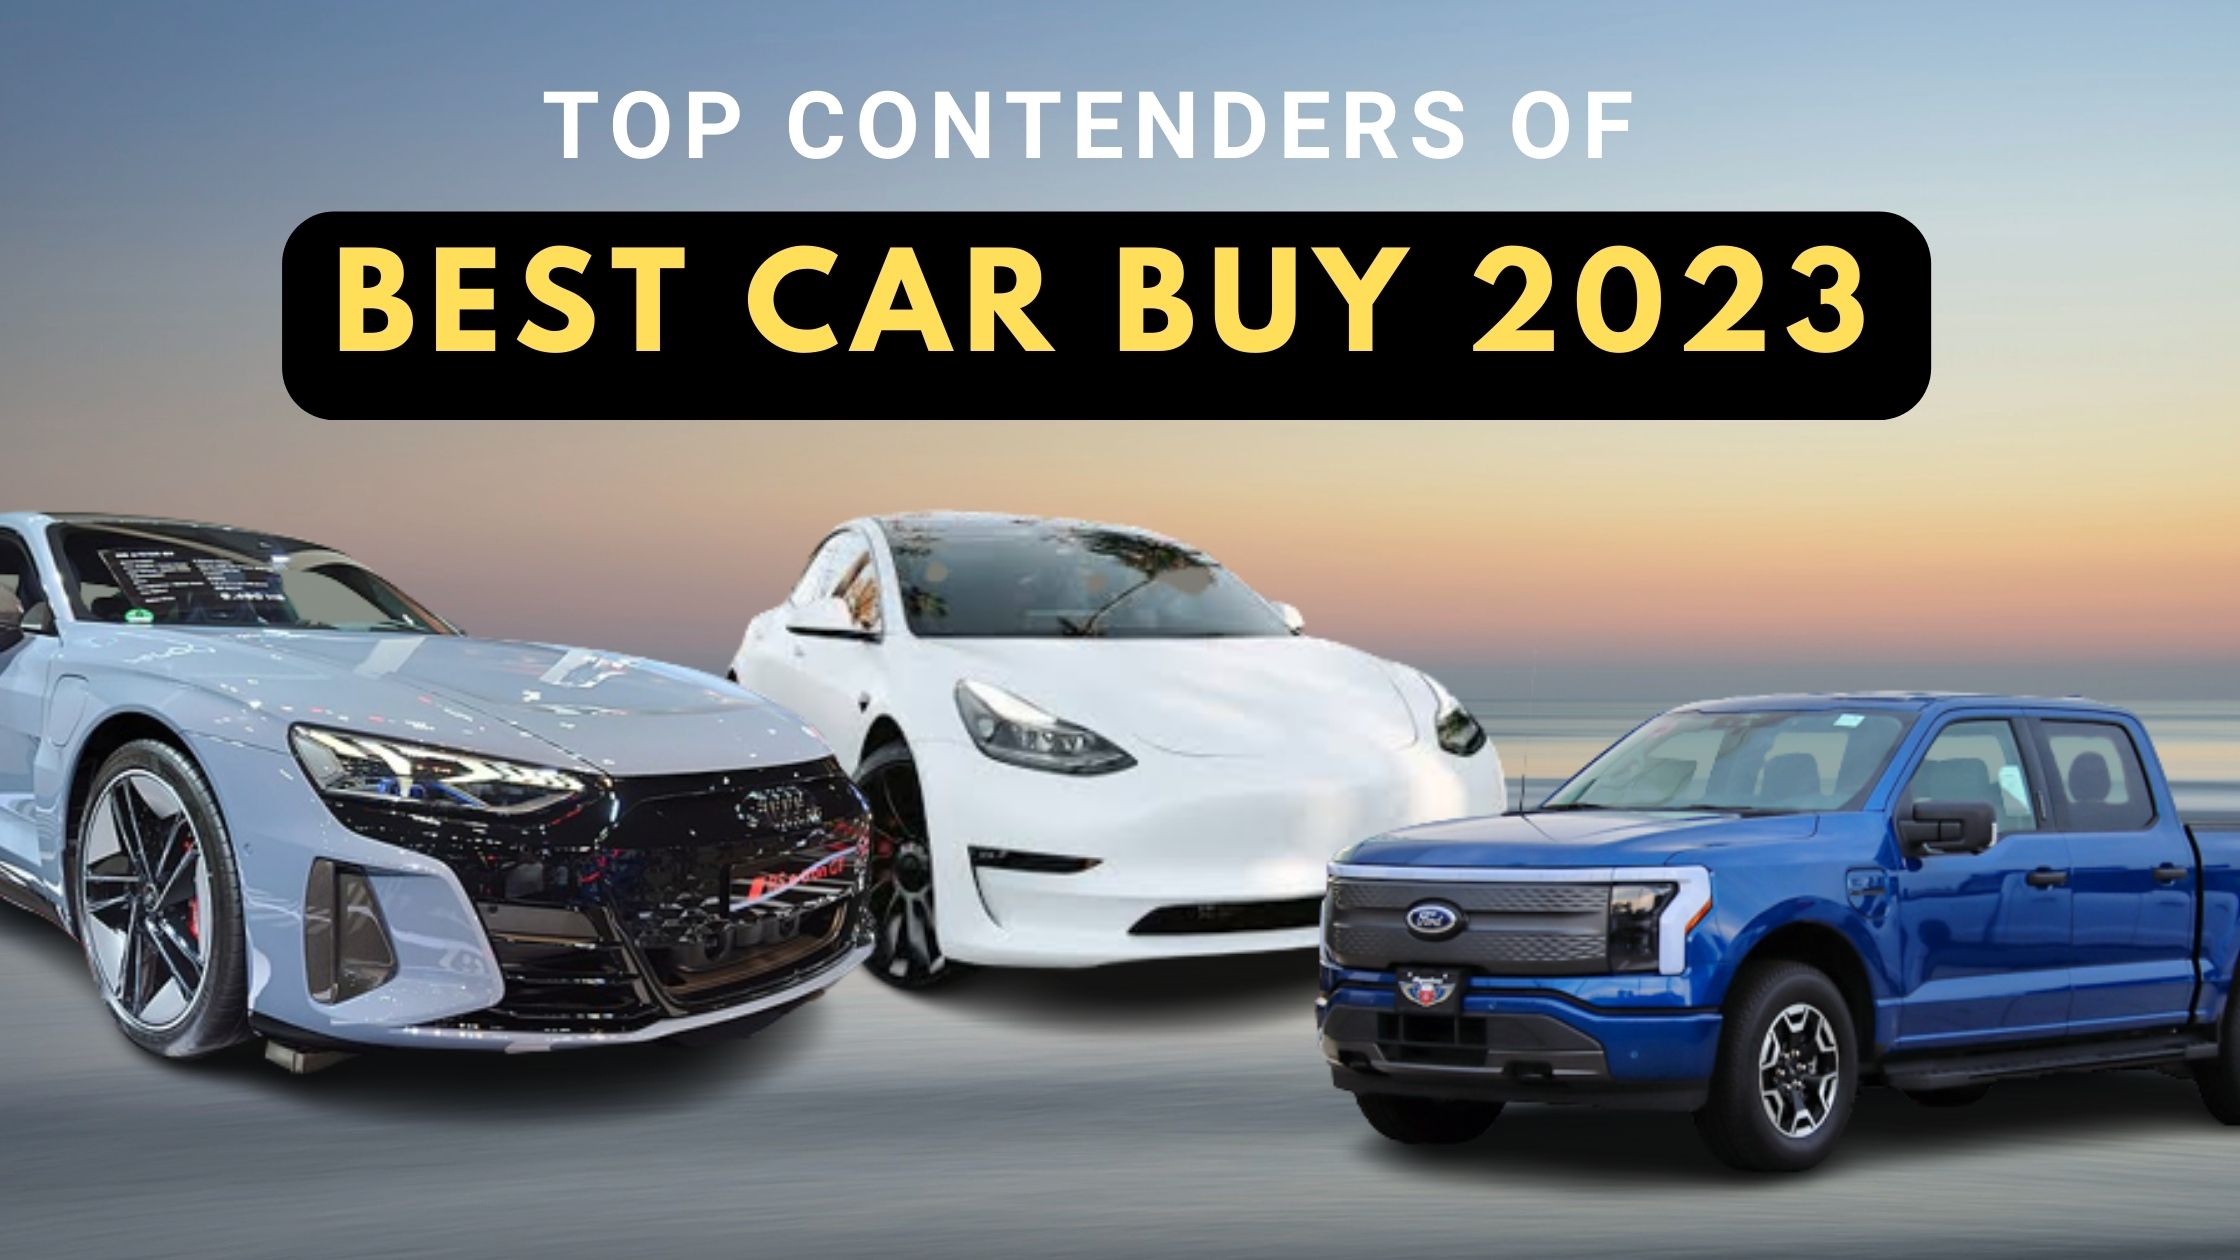 Best car buys 2023 parked together 